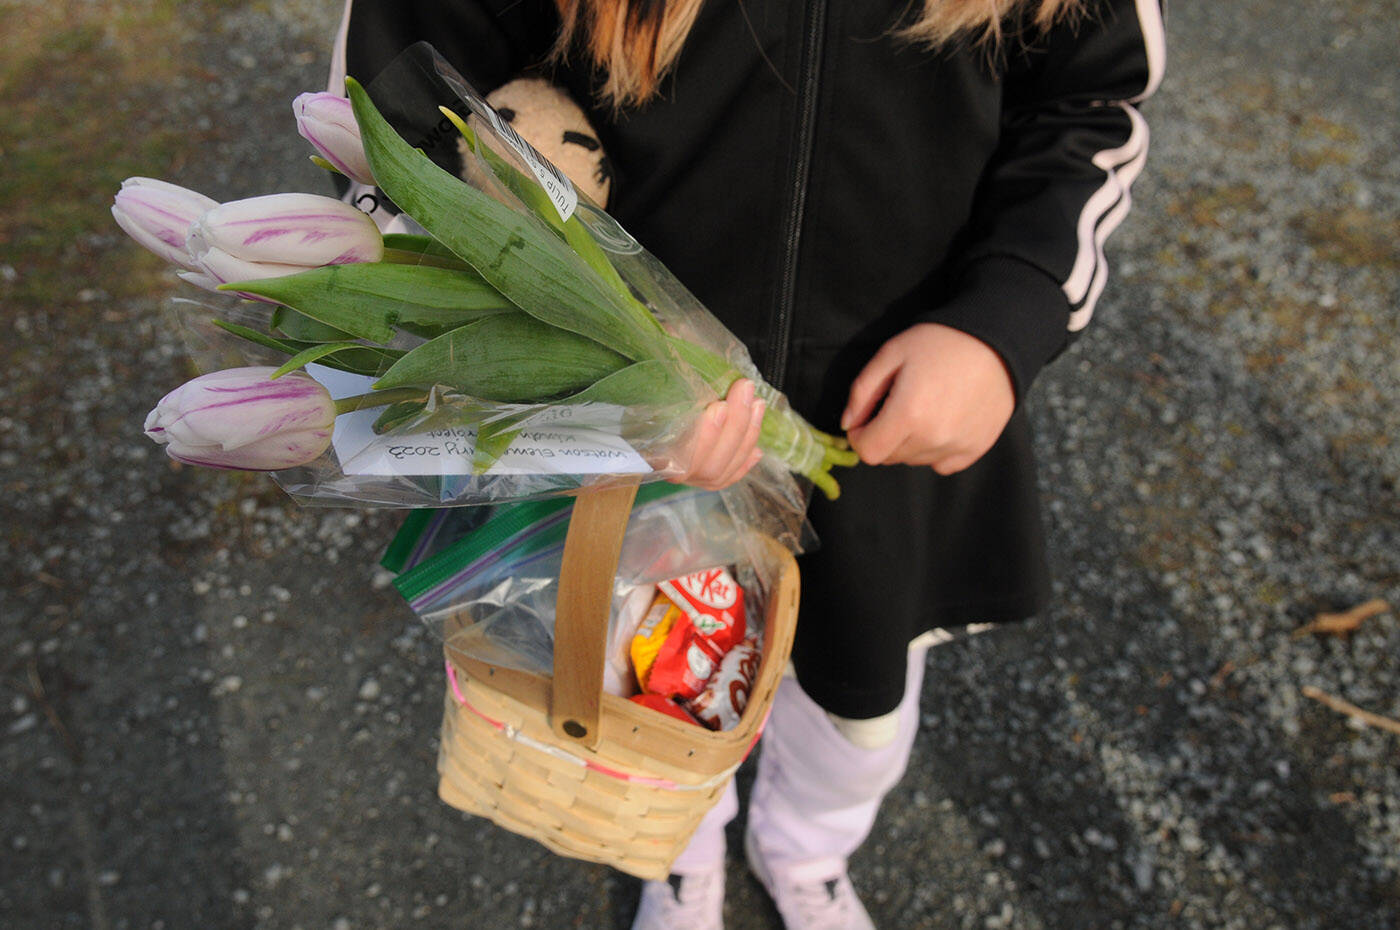 One student brought her own basket to carry goodies for Watson Elementarys Kindness Project on Wednesday, March 15, 2023. (Jenna Hauck/ Chilliwack Progress)